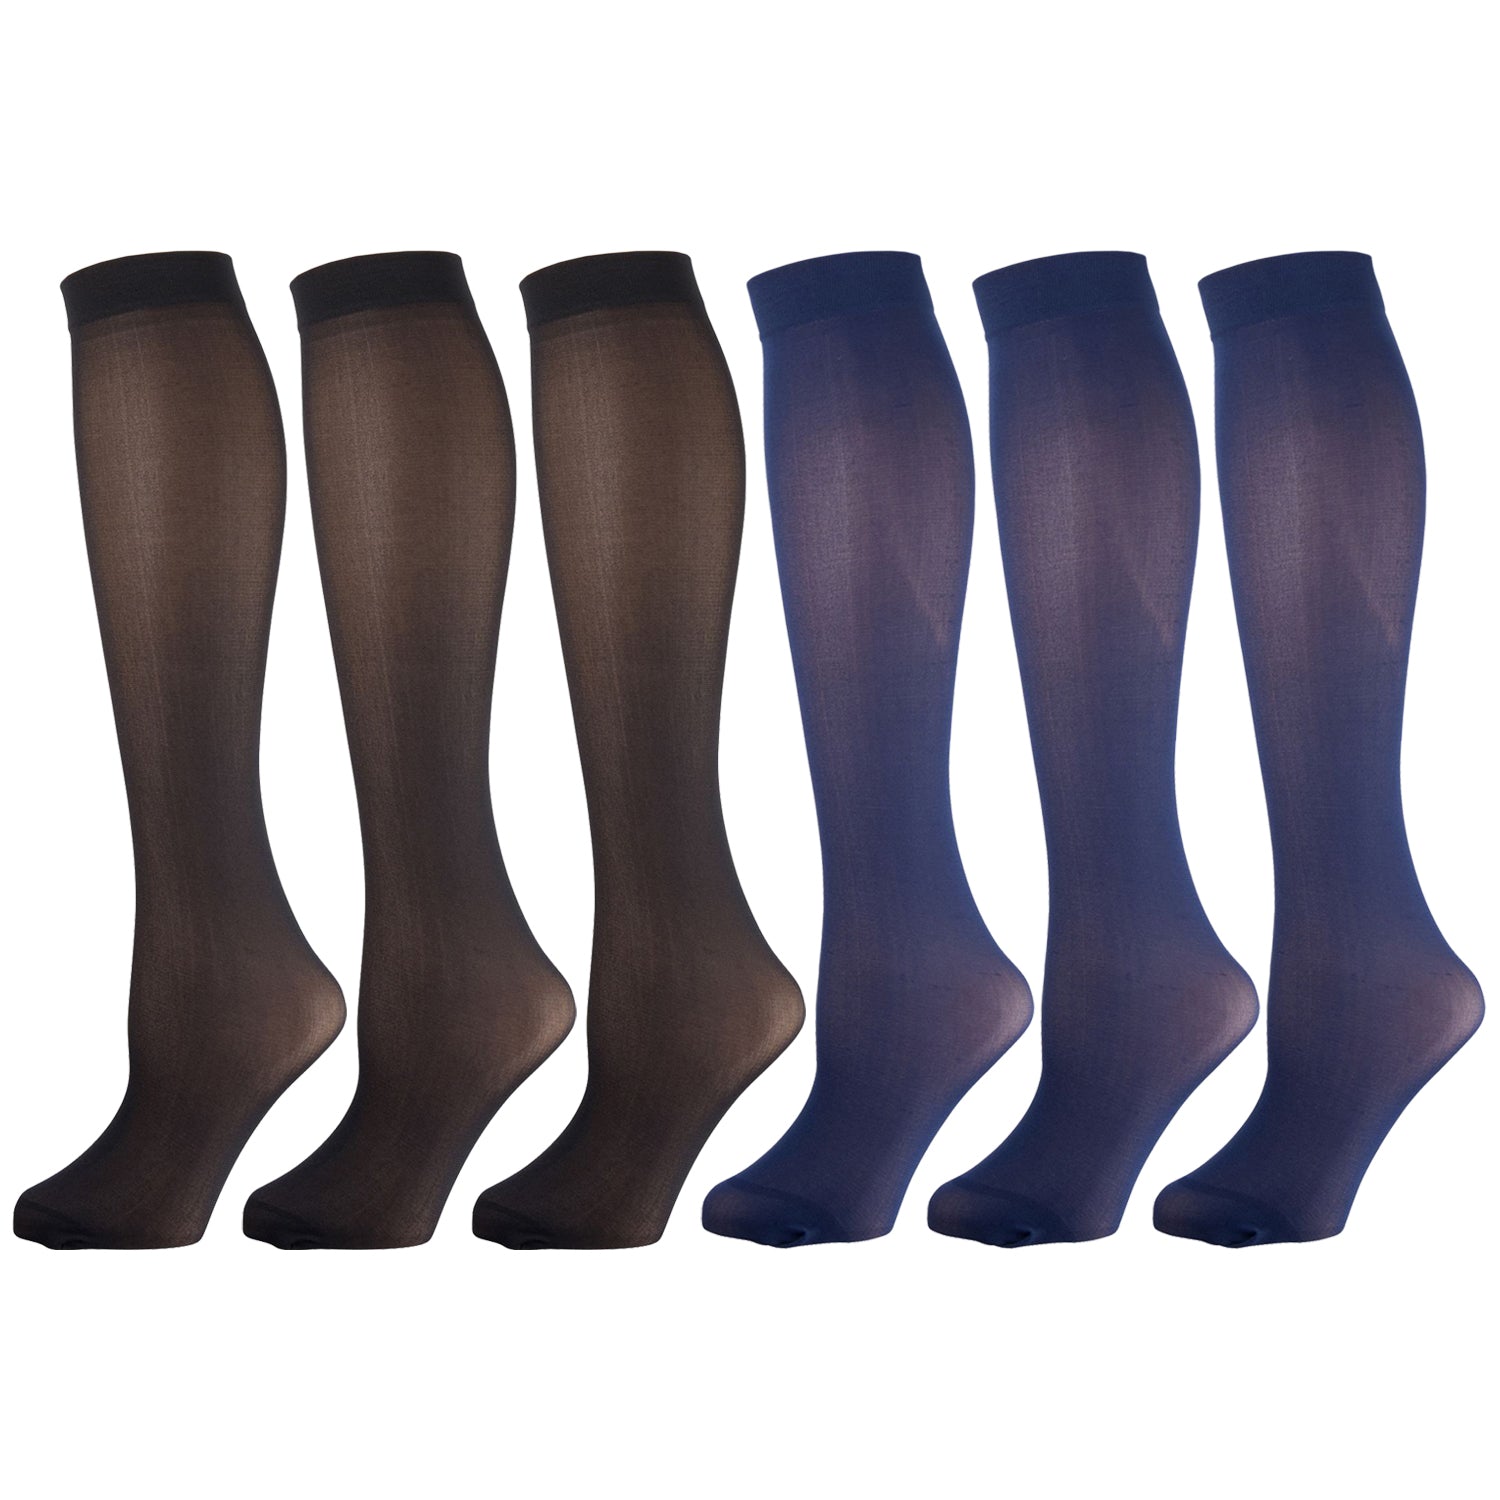 Women's Opaque Stretchy Spandex Knee High Trouser Socks, Size 9-11